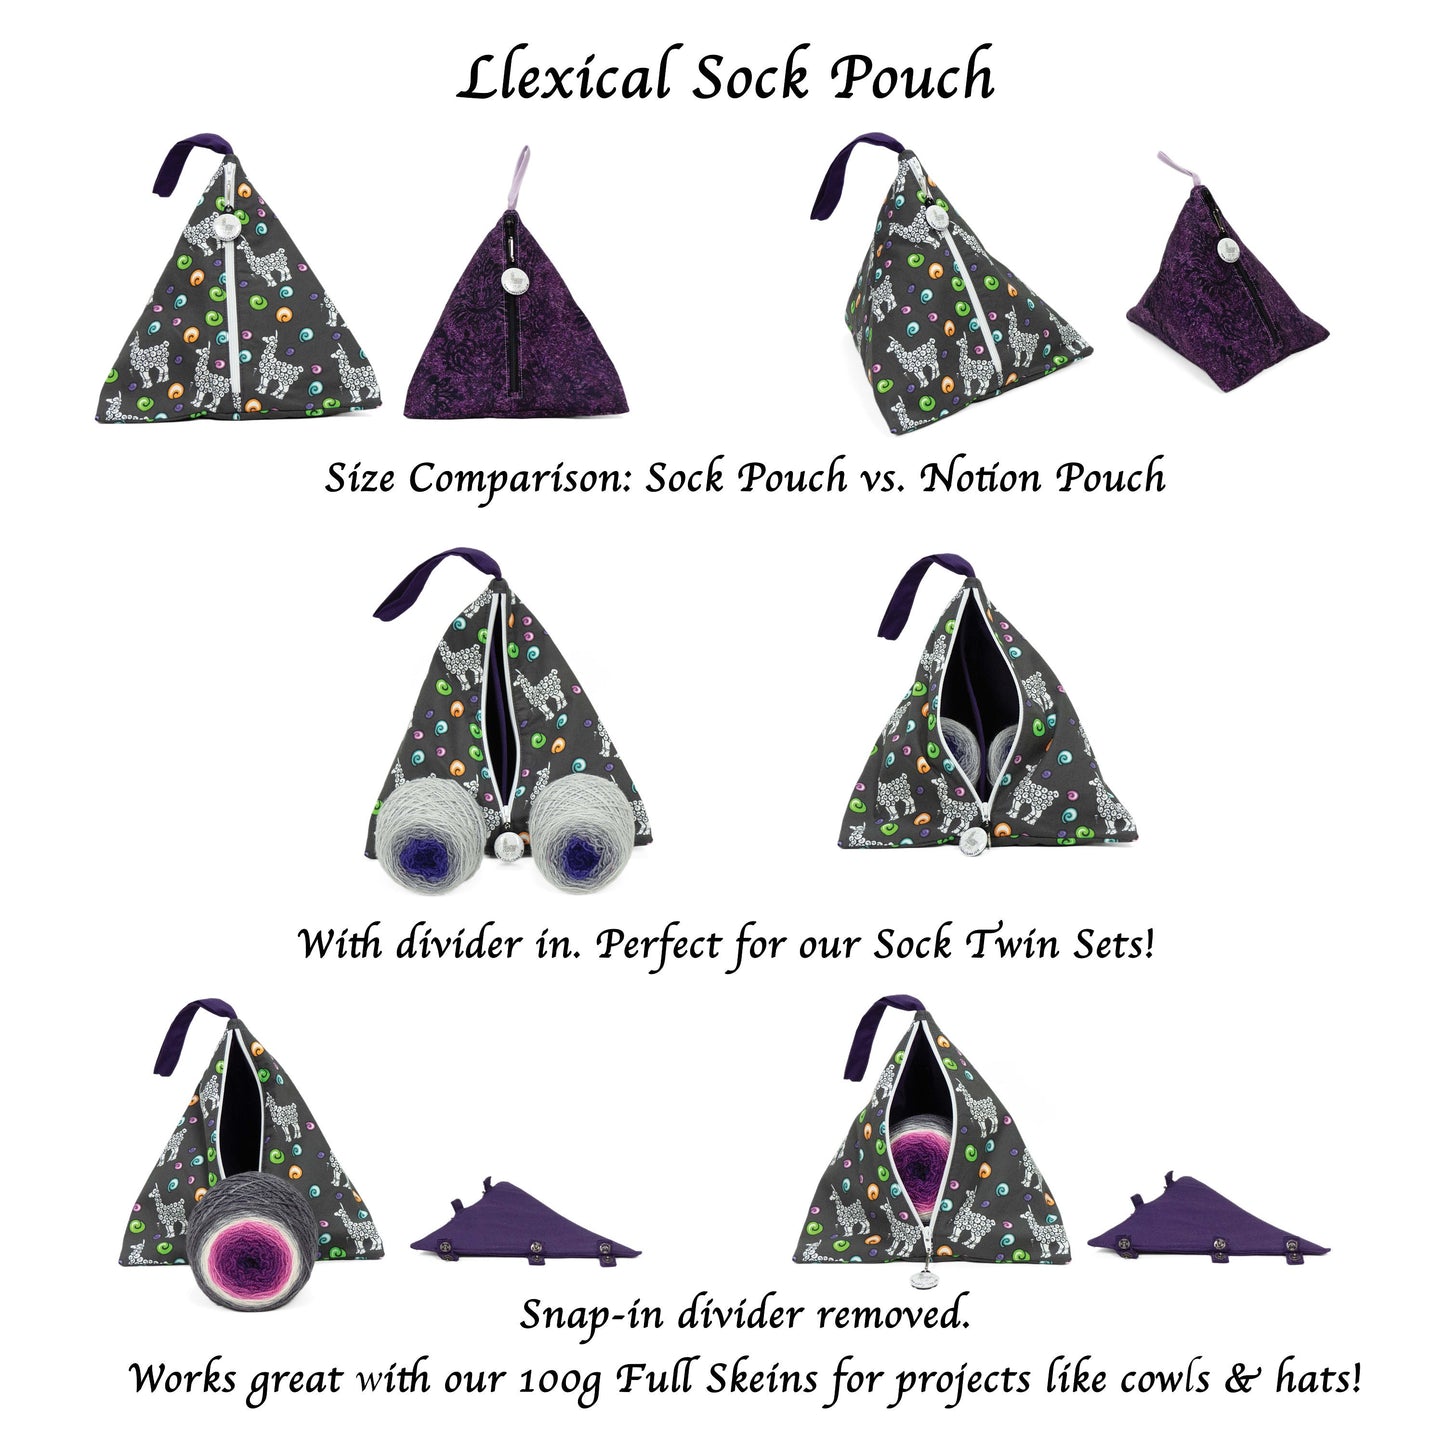 Metallic Light Pebbles - Llexical Divided Sock Pouch - Knitting, Crochet, Spinning Project Bag